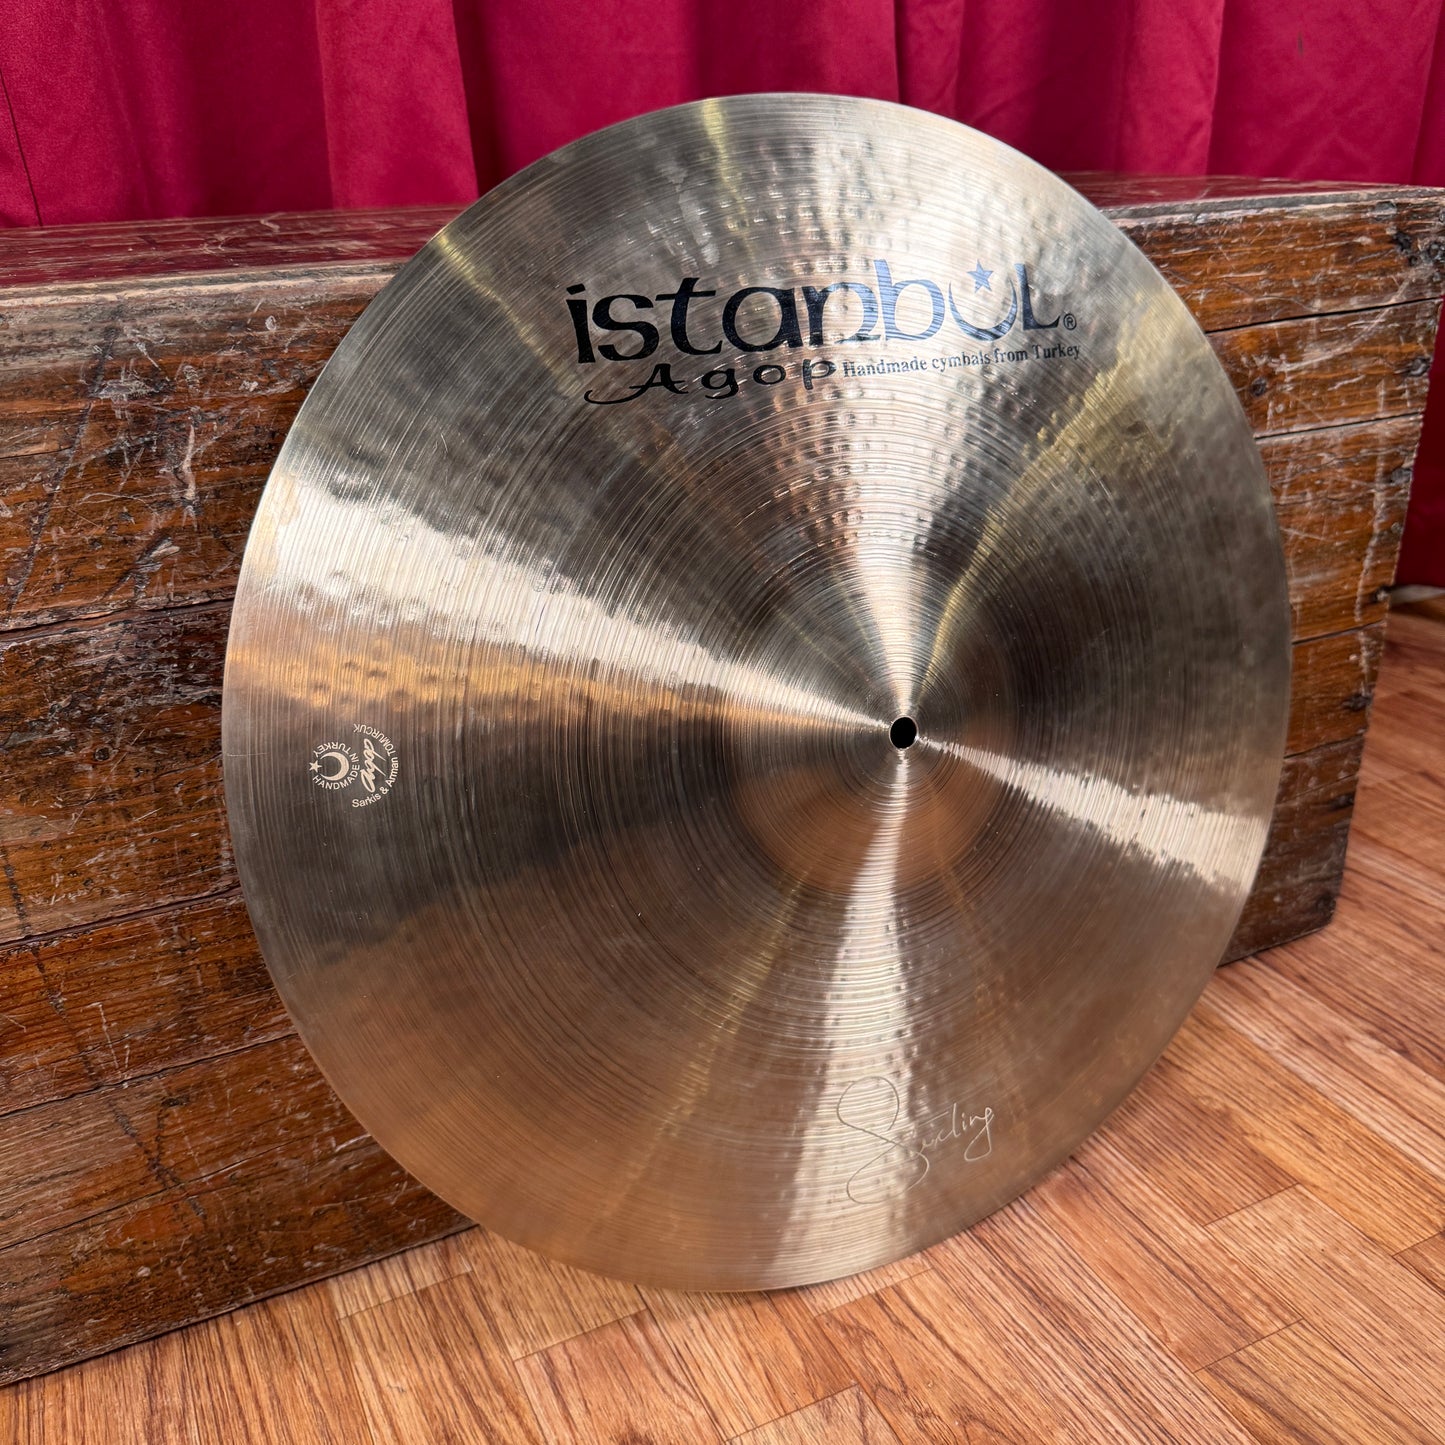 20" Istanbul Agop Sterling Signature Crash Ride Cymbal 2184g *Video Demo*